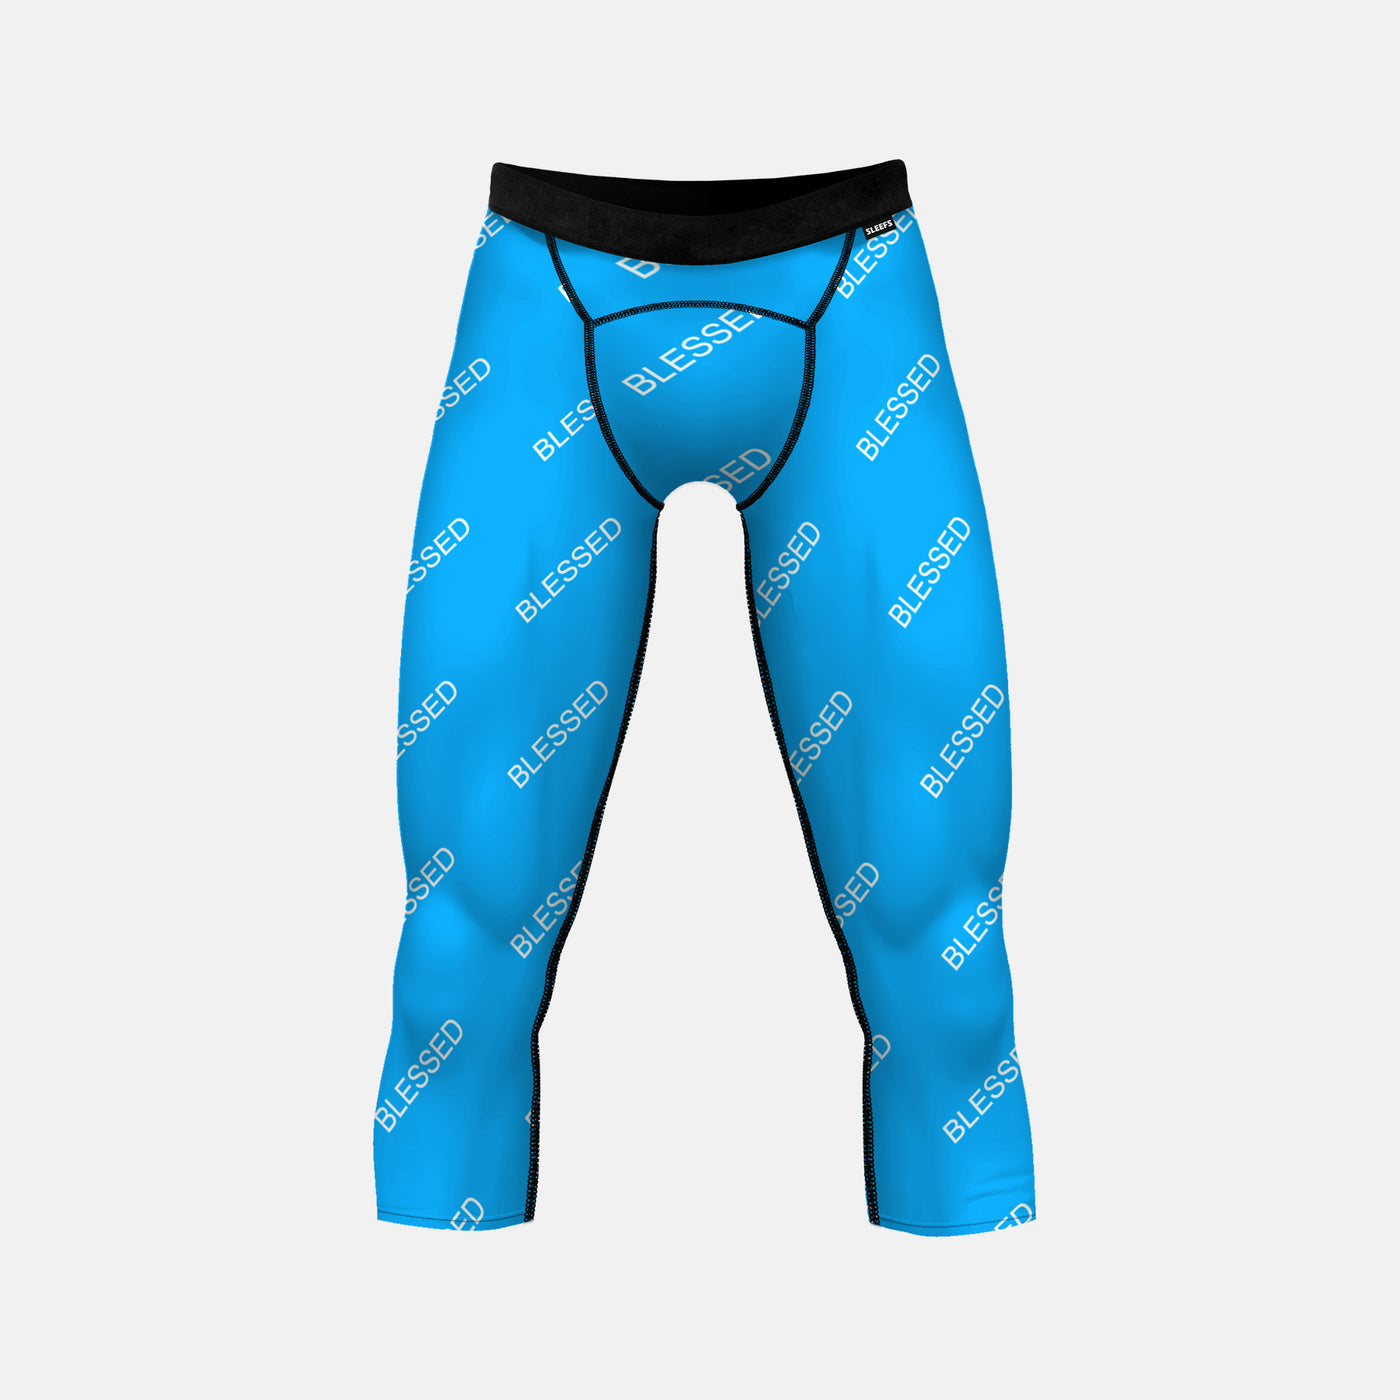 Blessed Pattern Blue 3/4 Tights for men